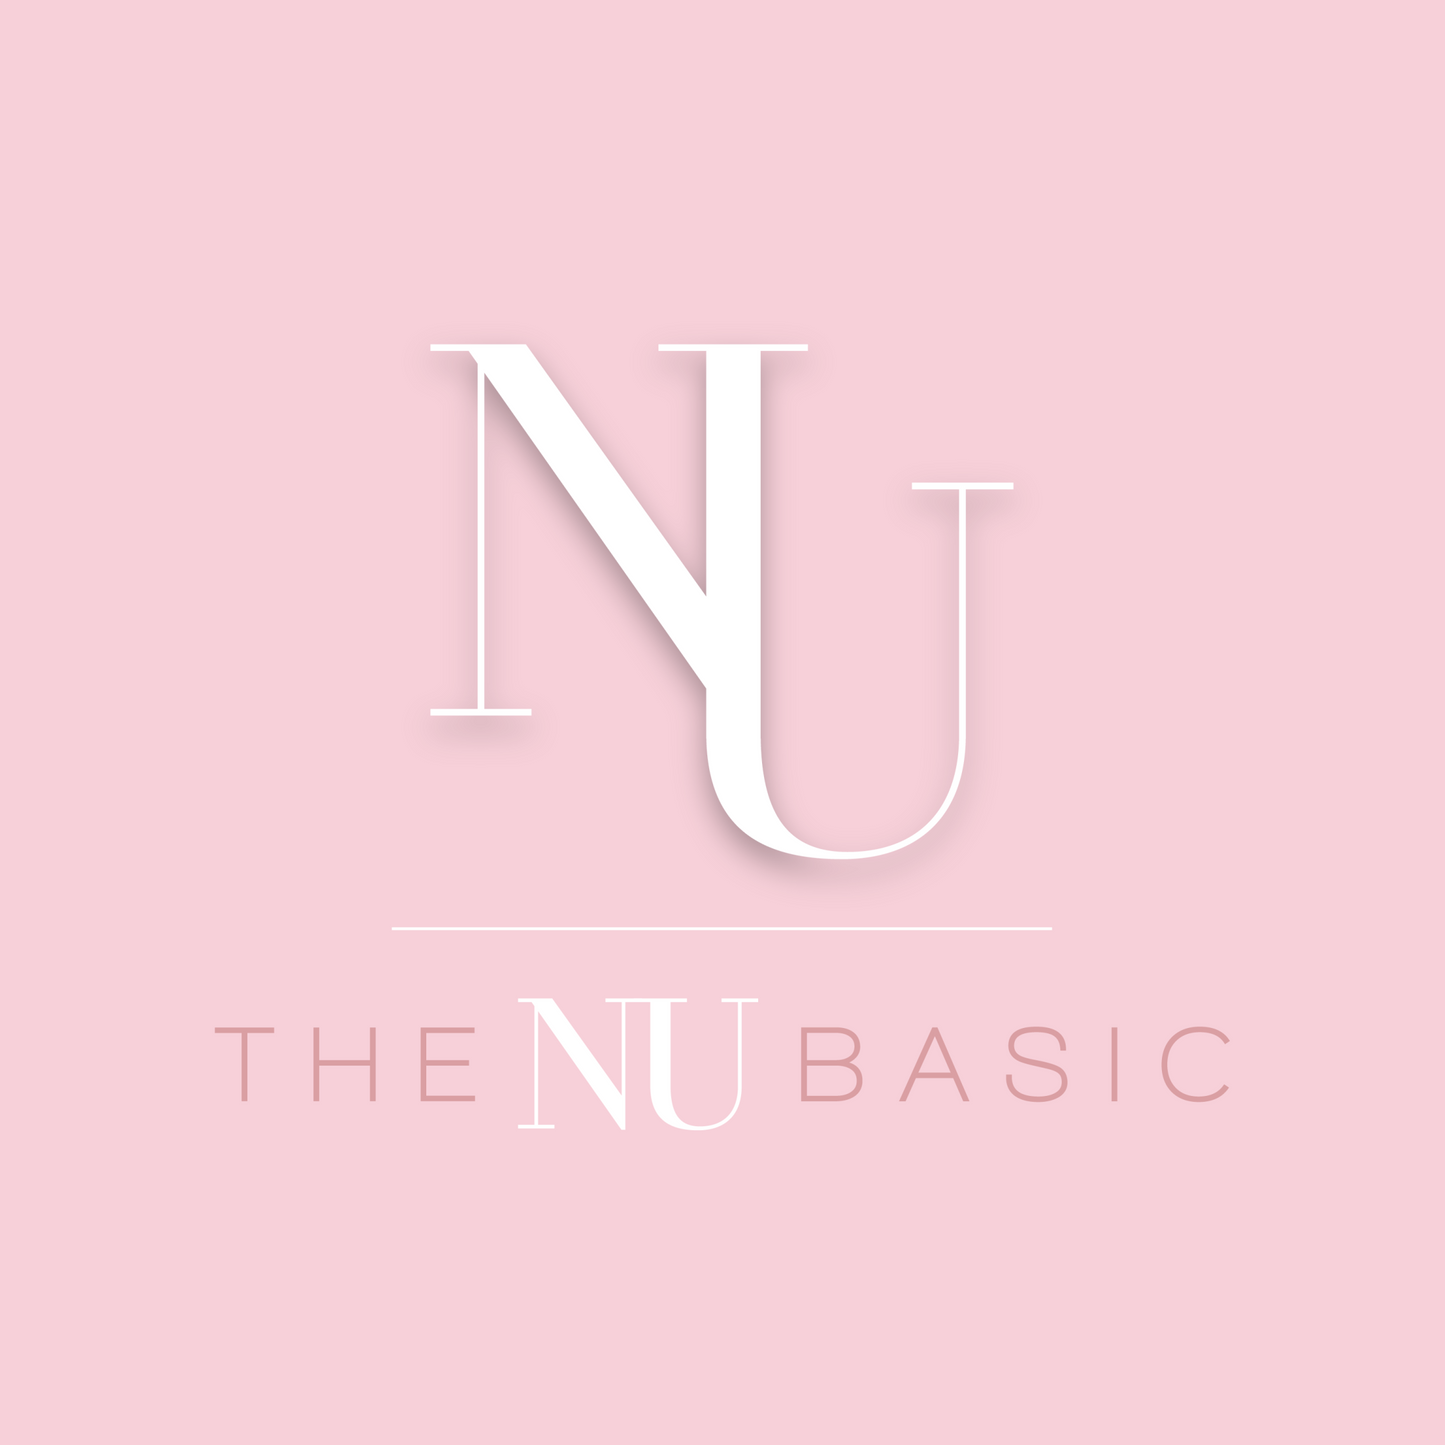 x THE NU BASIC GIFT CARD x